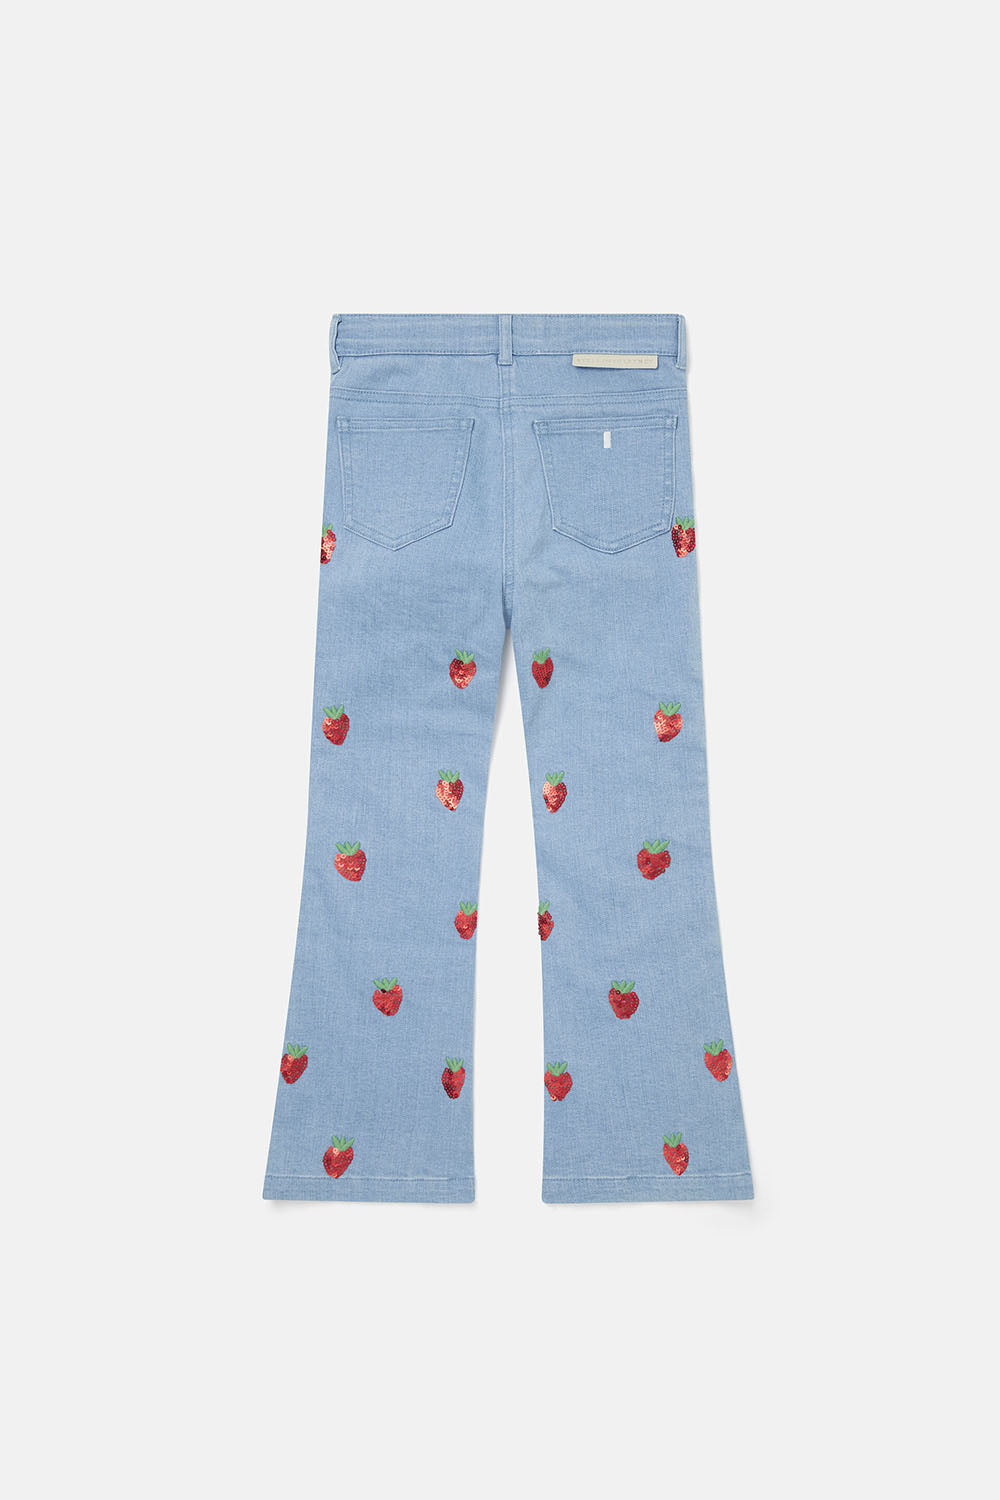 Sequins Strawberries Embro Flare Denim Trousers